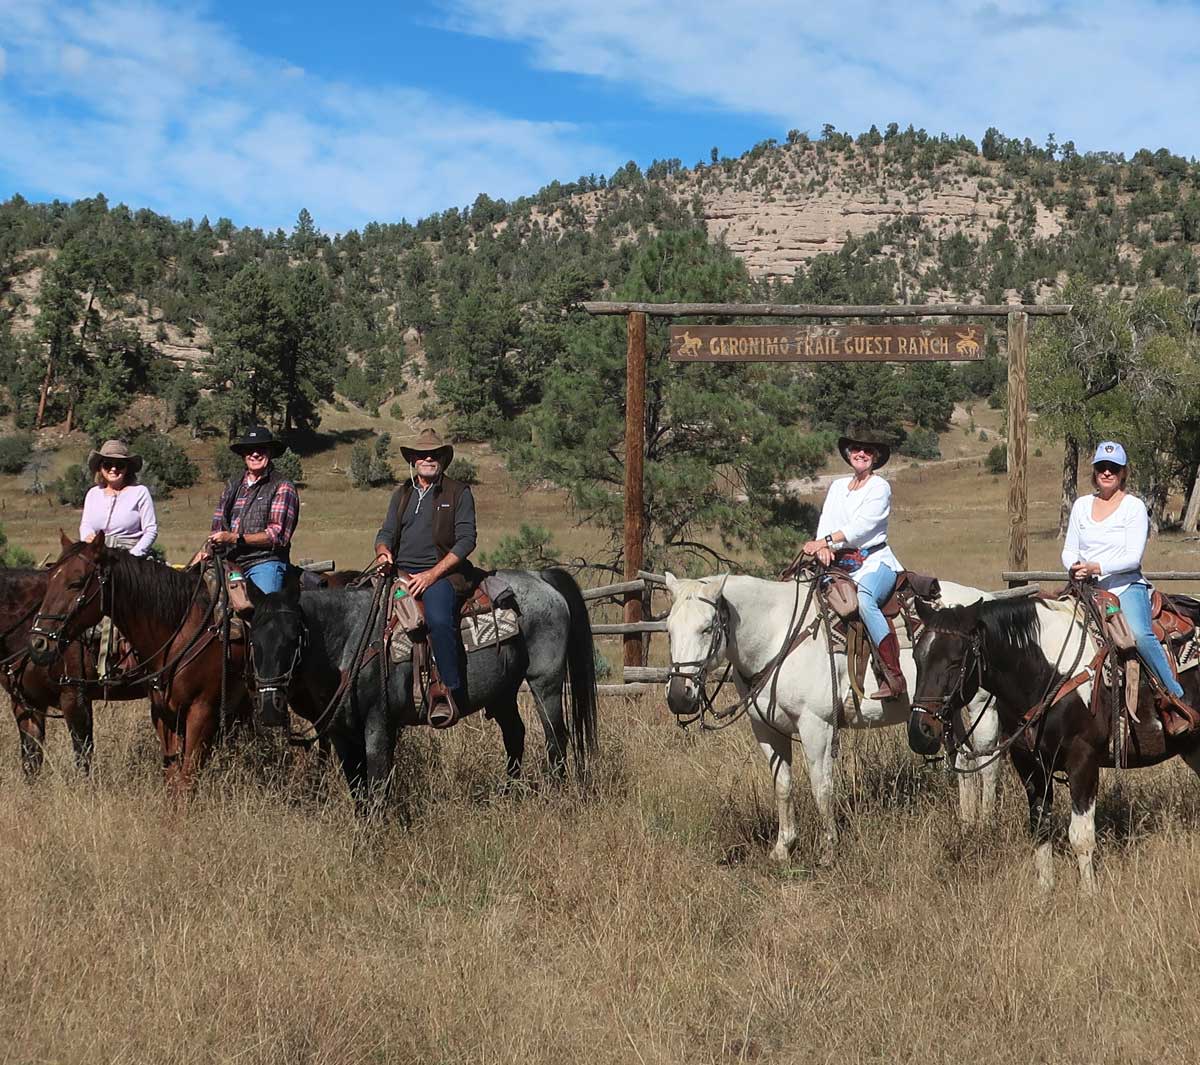 Geronimo Trail Guest Ranch, people on horseback